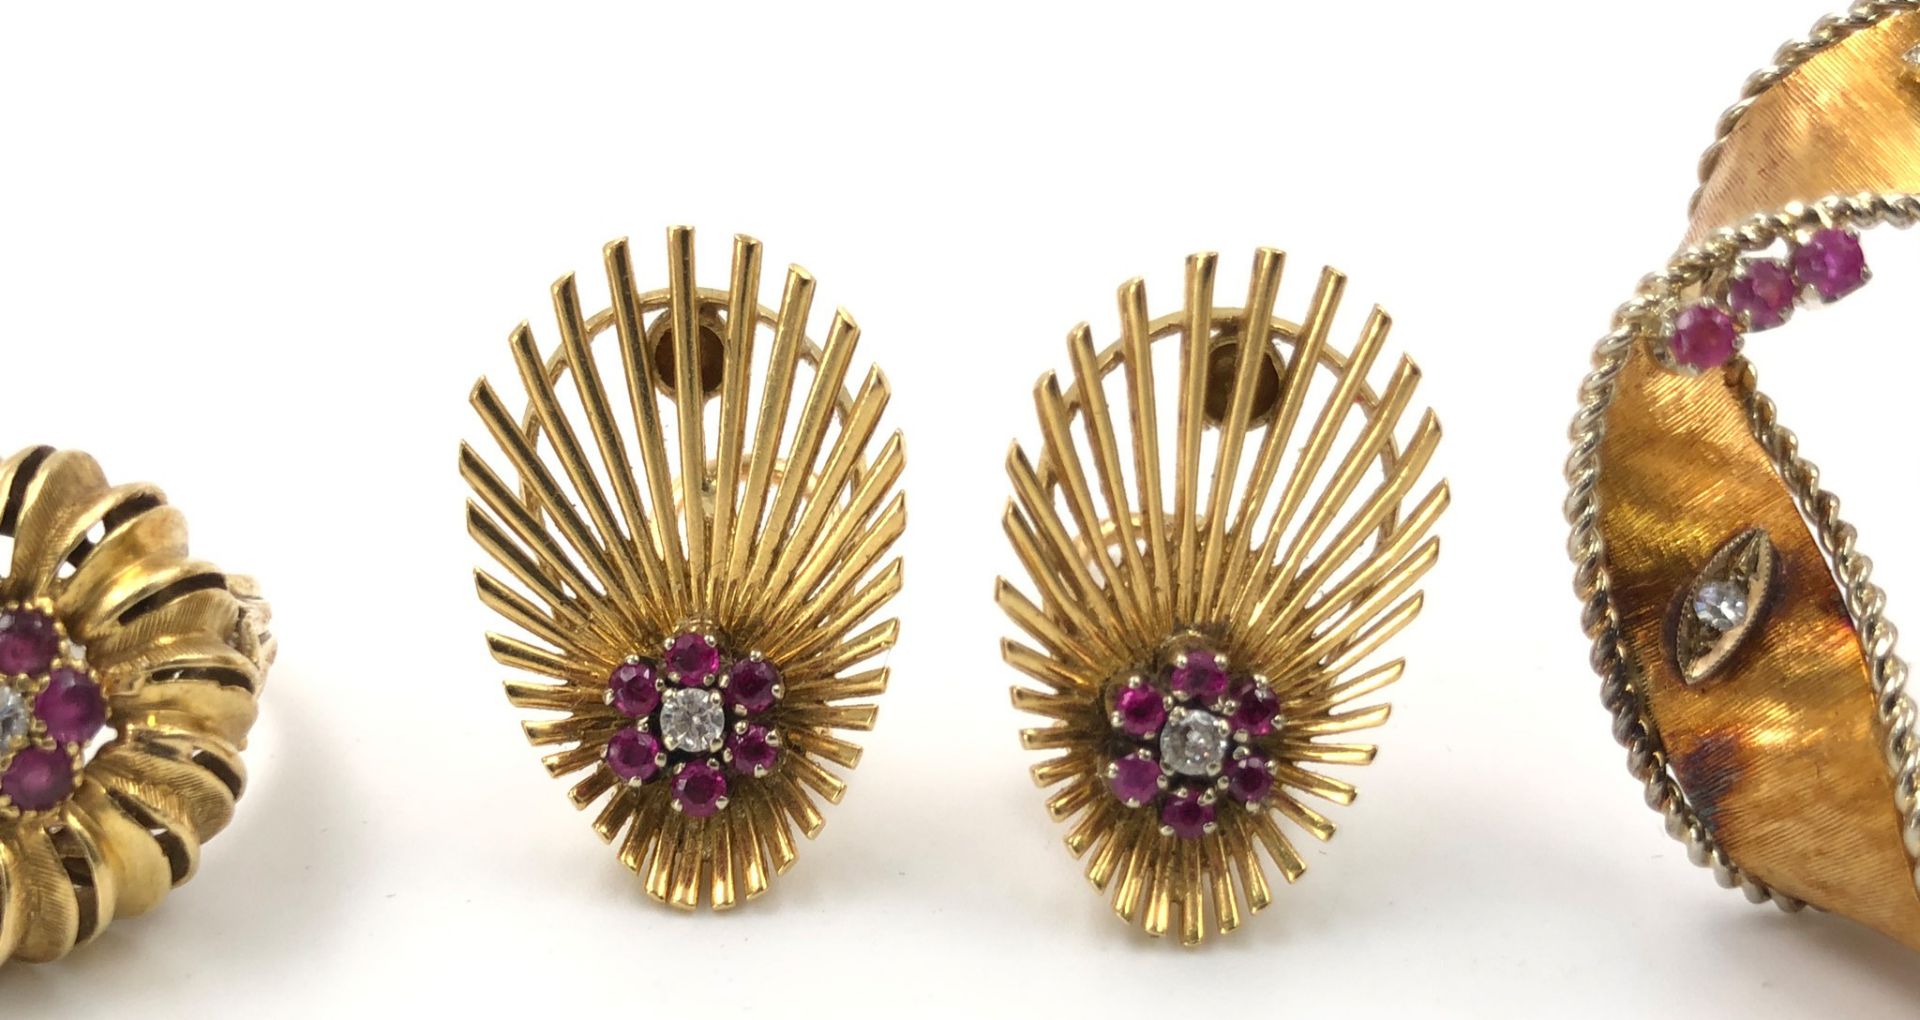 Set. 750 gold. Pair of earrings, ring and brooch. Diamonds and rubies.27.8 grams total weight. - Image 3 of 9